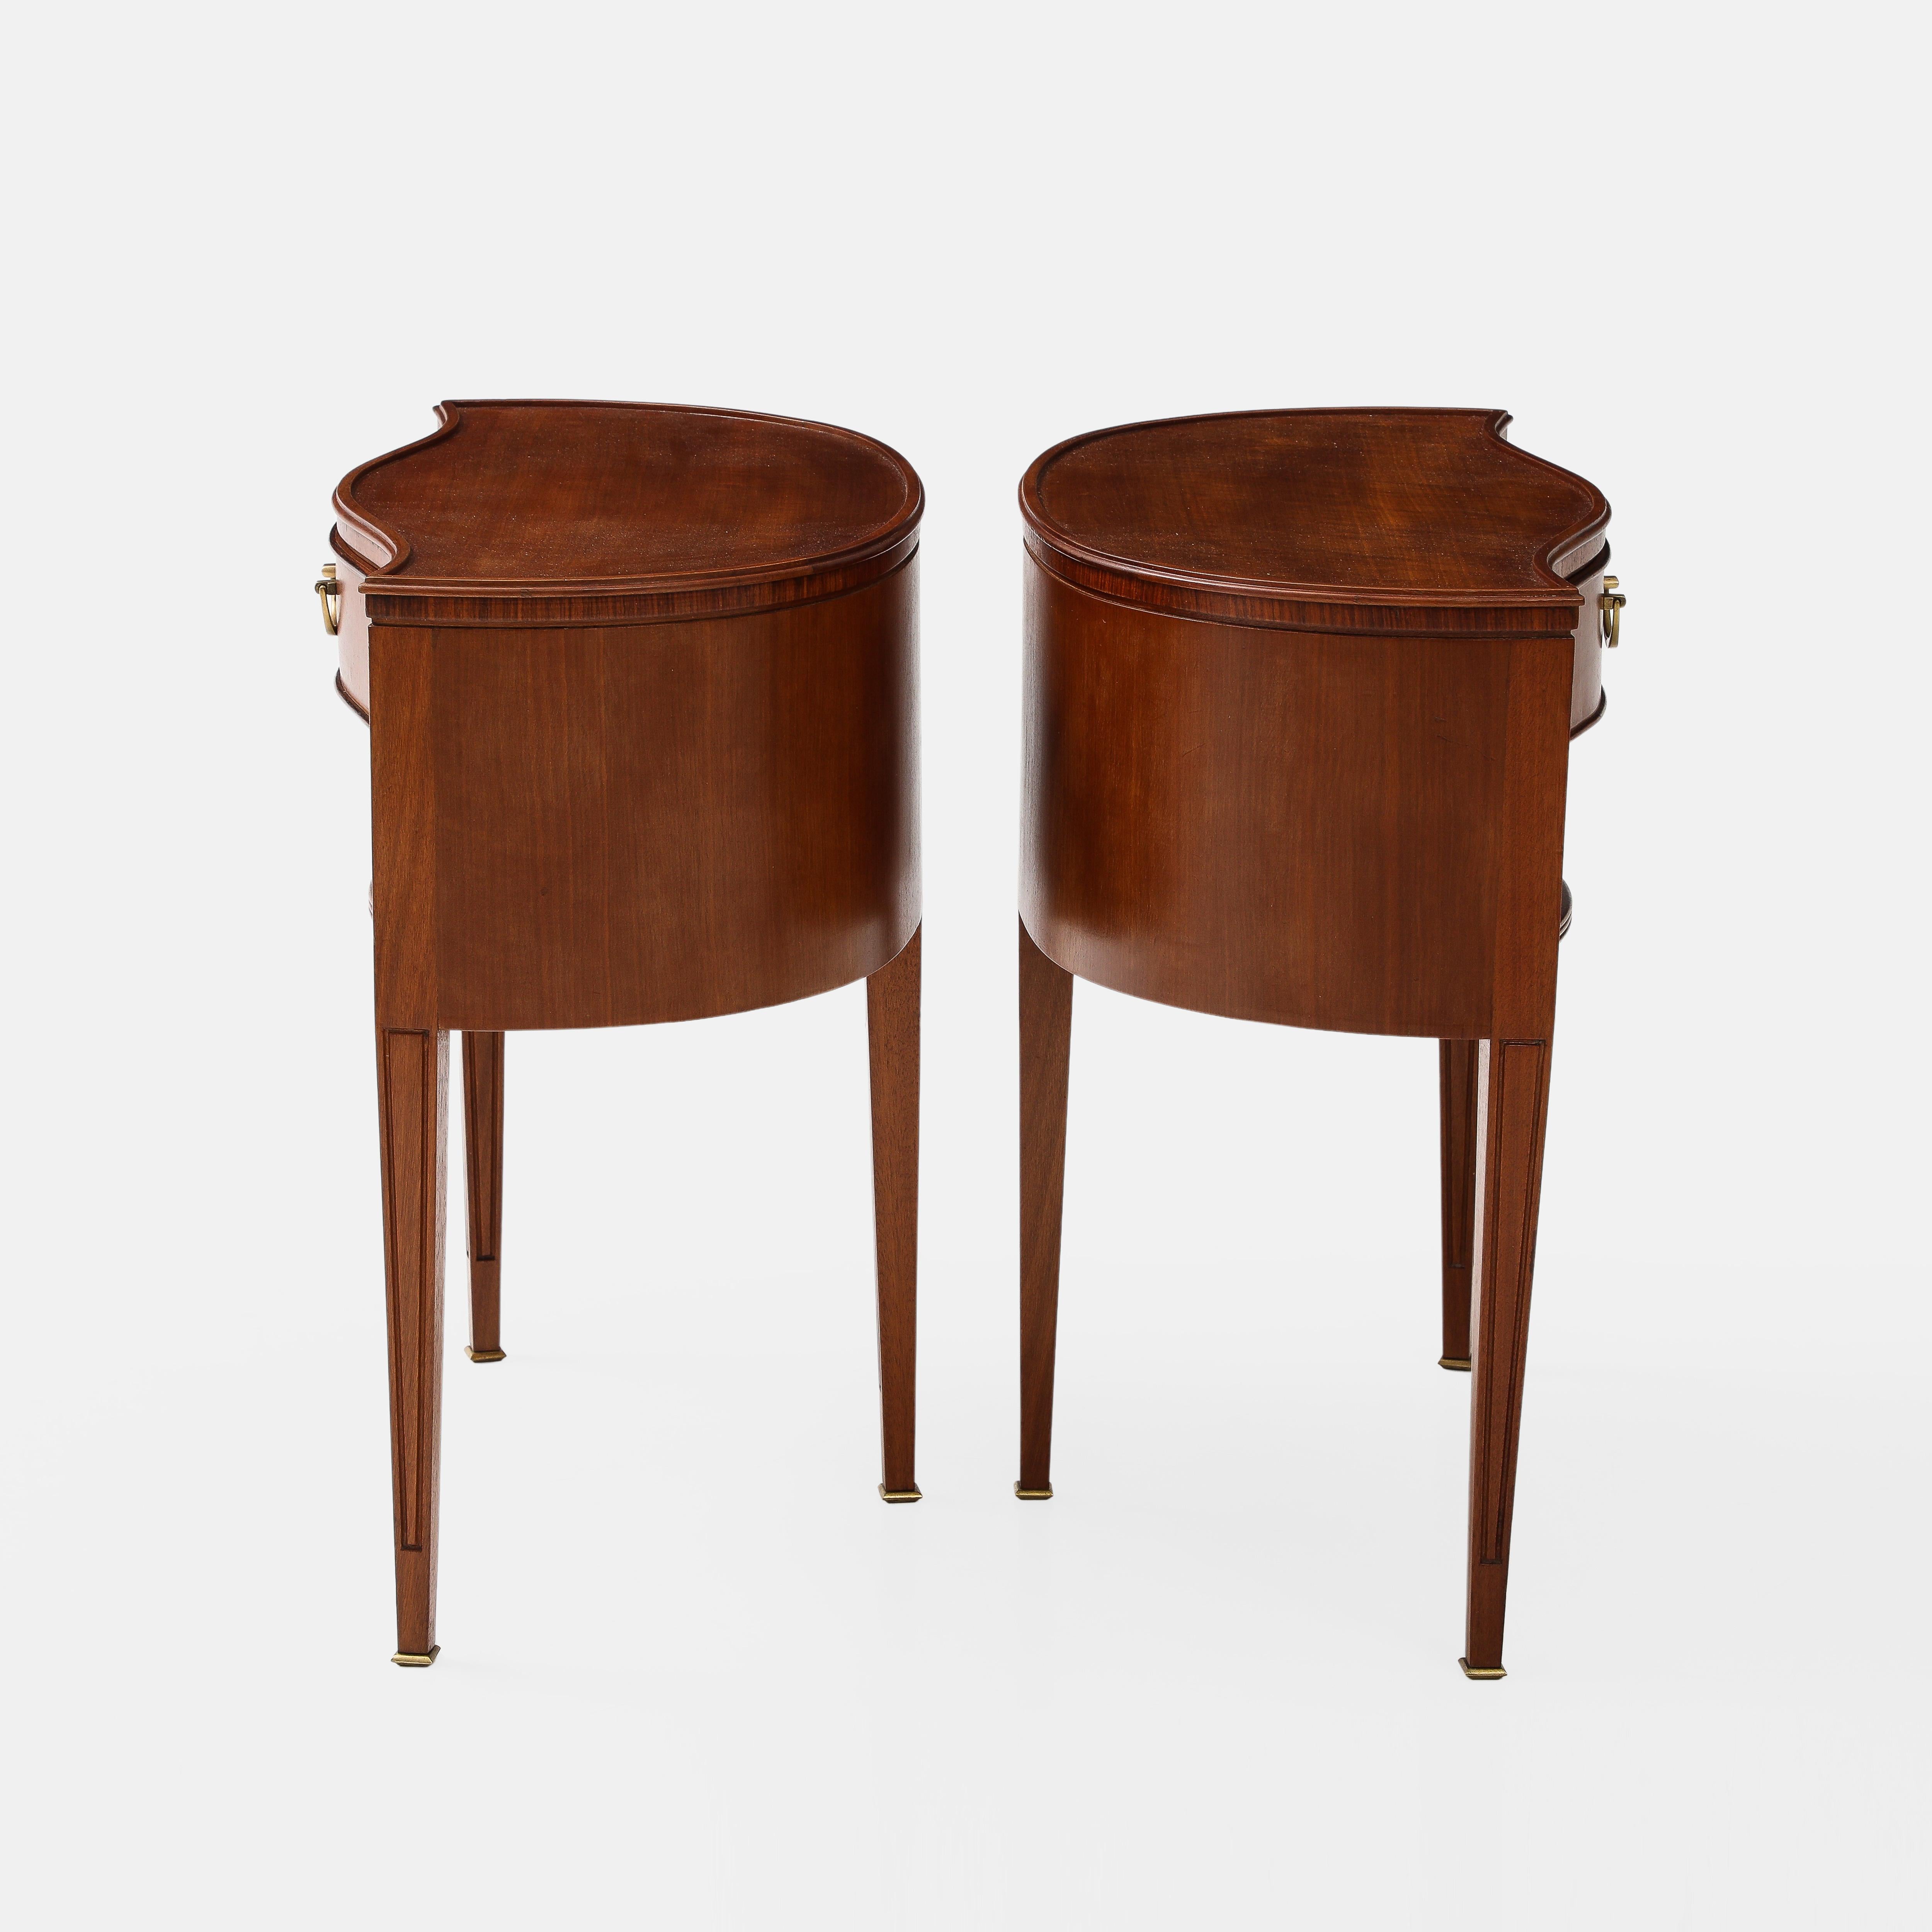 Polished 1950s Paolo Buffa Pair of Mahogany Nightstands or Bedside Tables For Sale